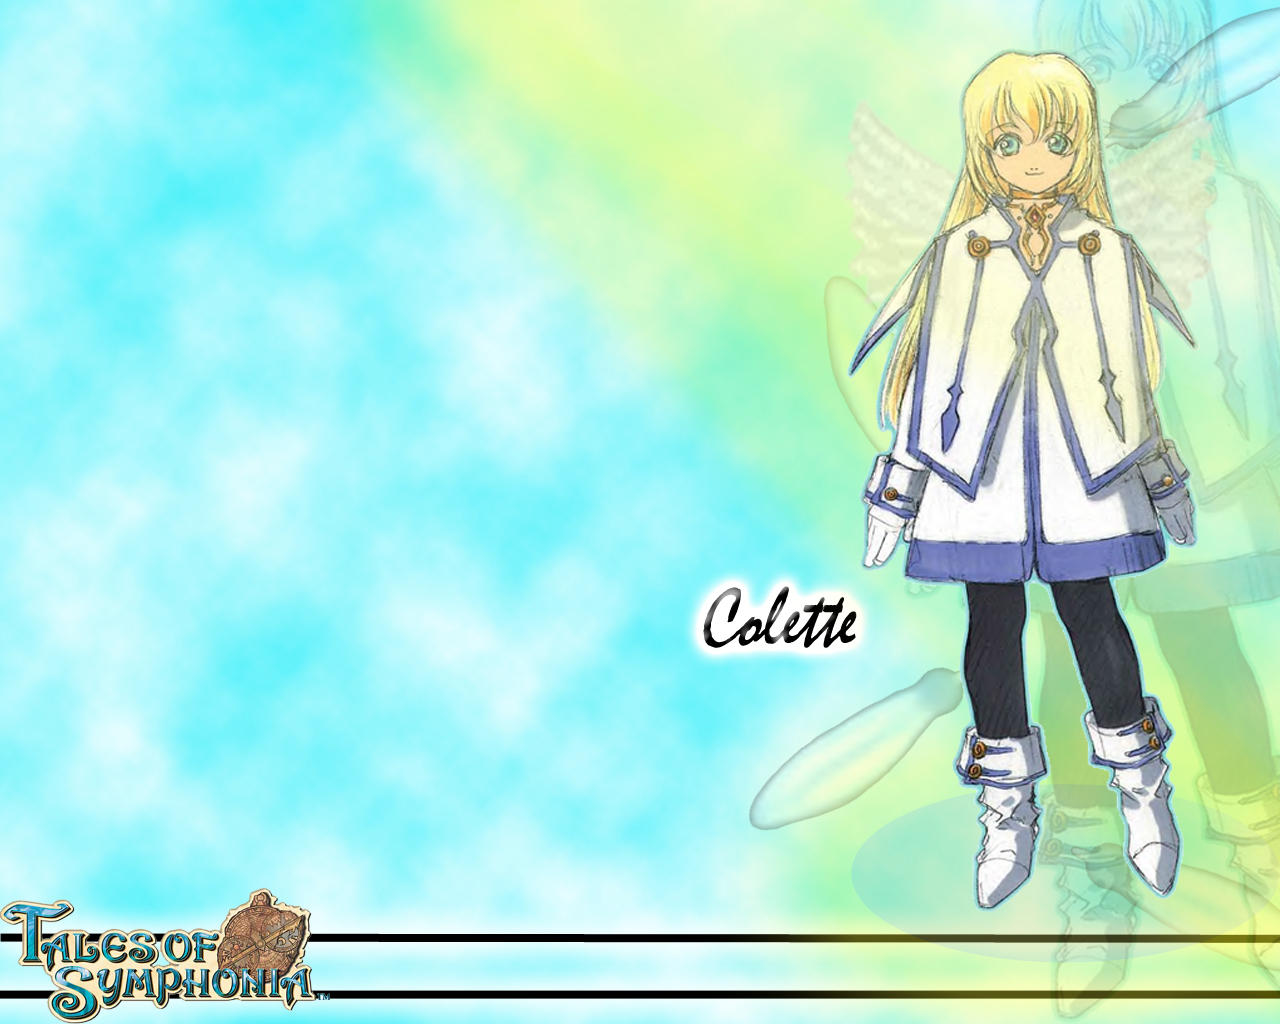 Tales-of-symphonia-gamecube-iso-german 'LINK' tales_of_symphonia___colette_by_dibby